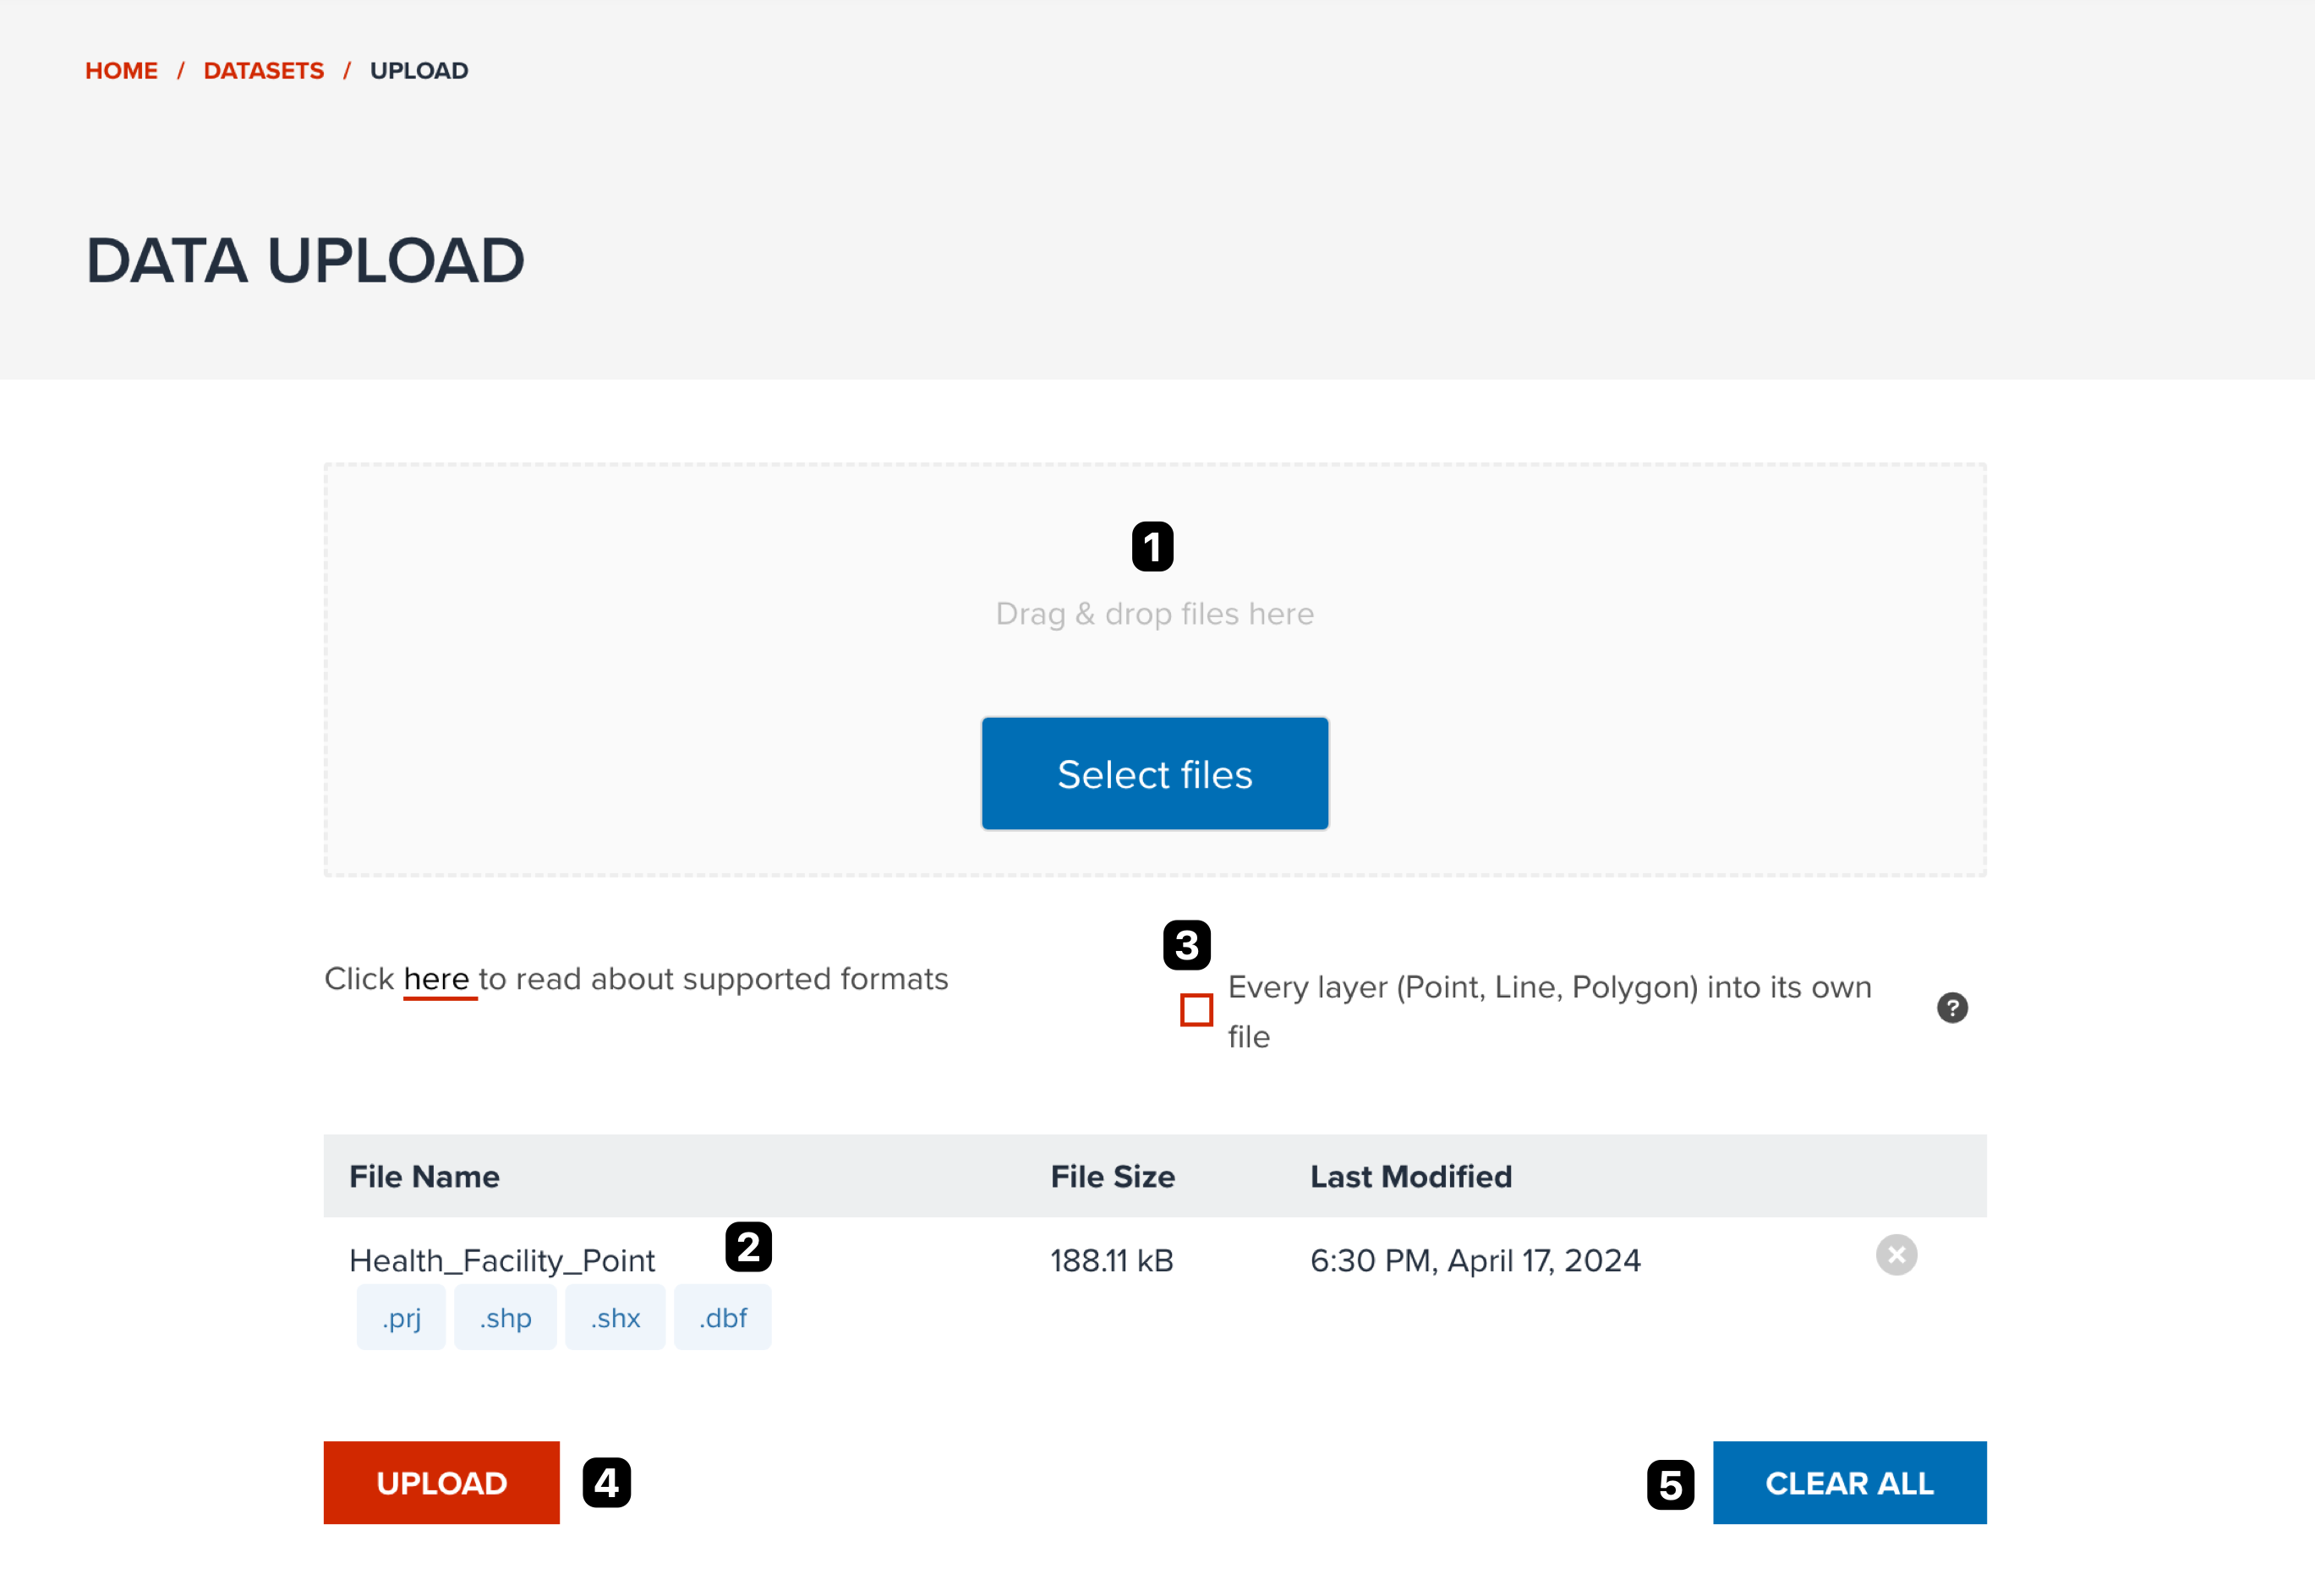 Data upload page